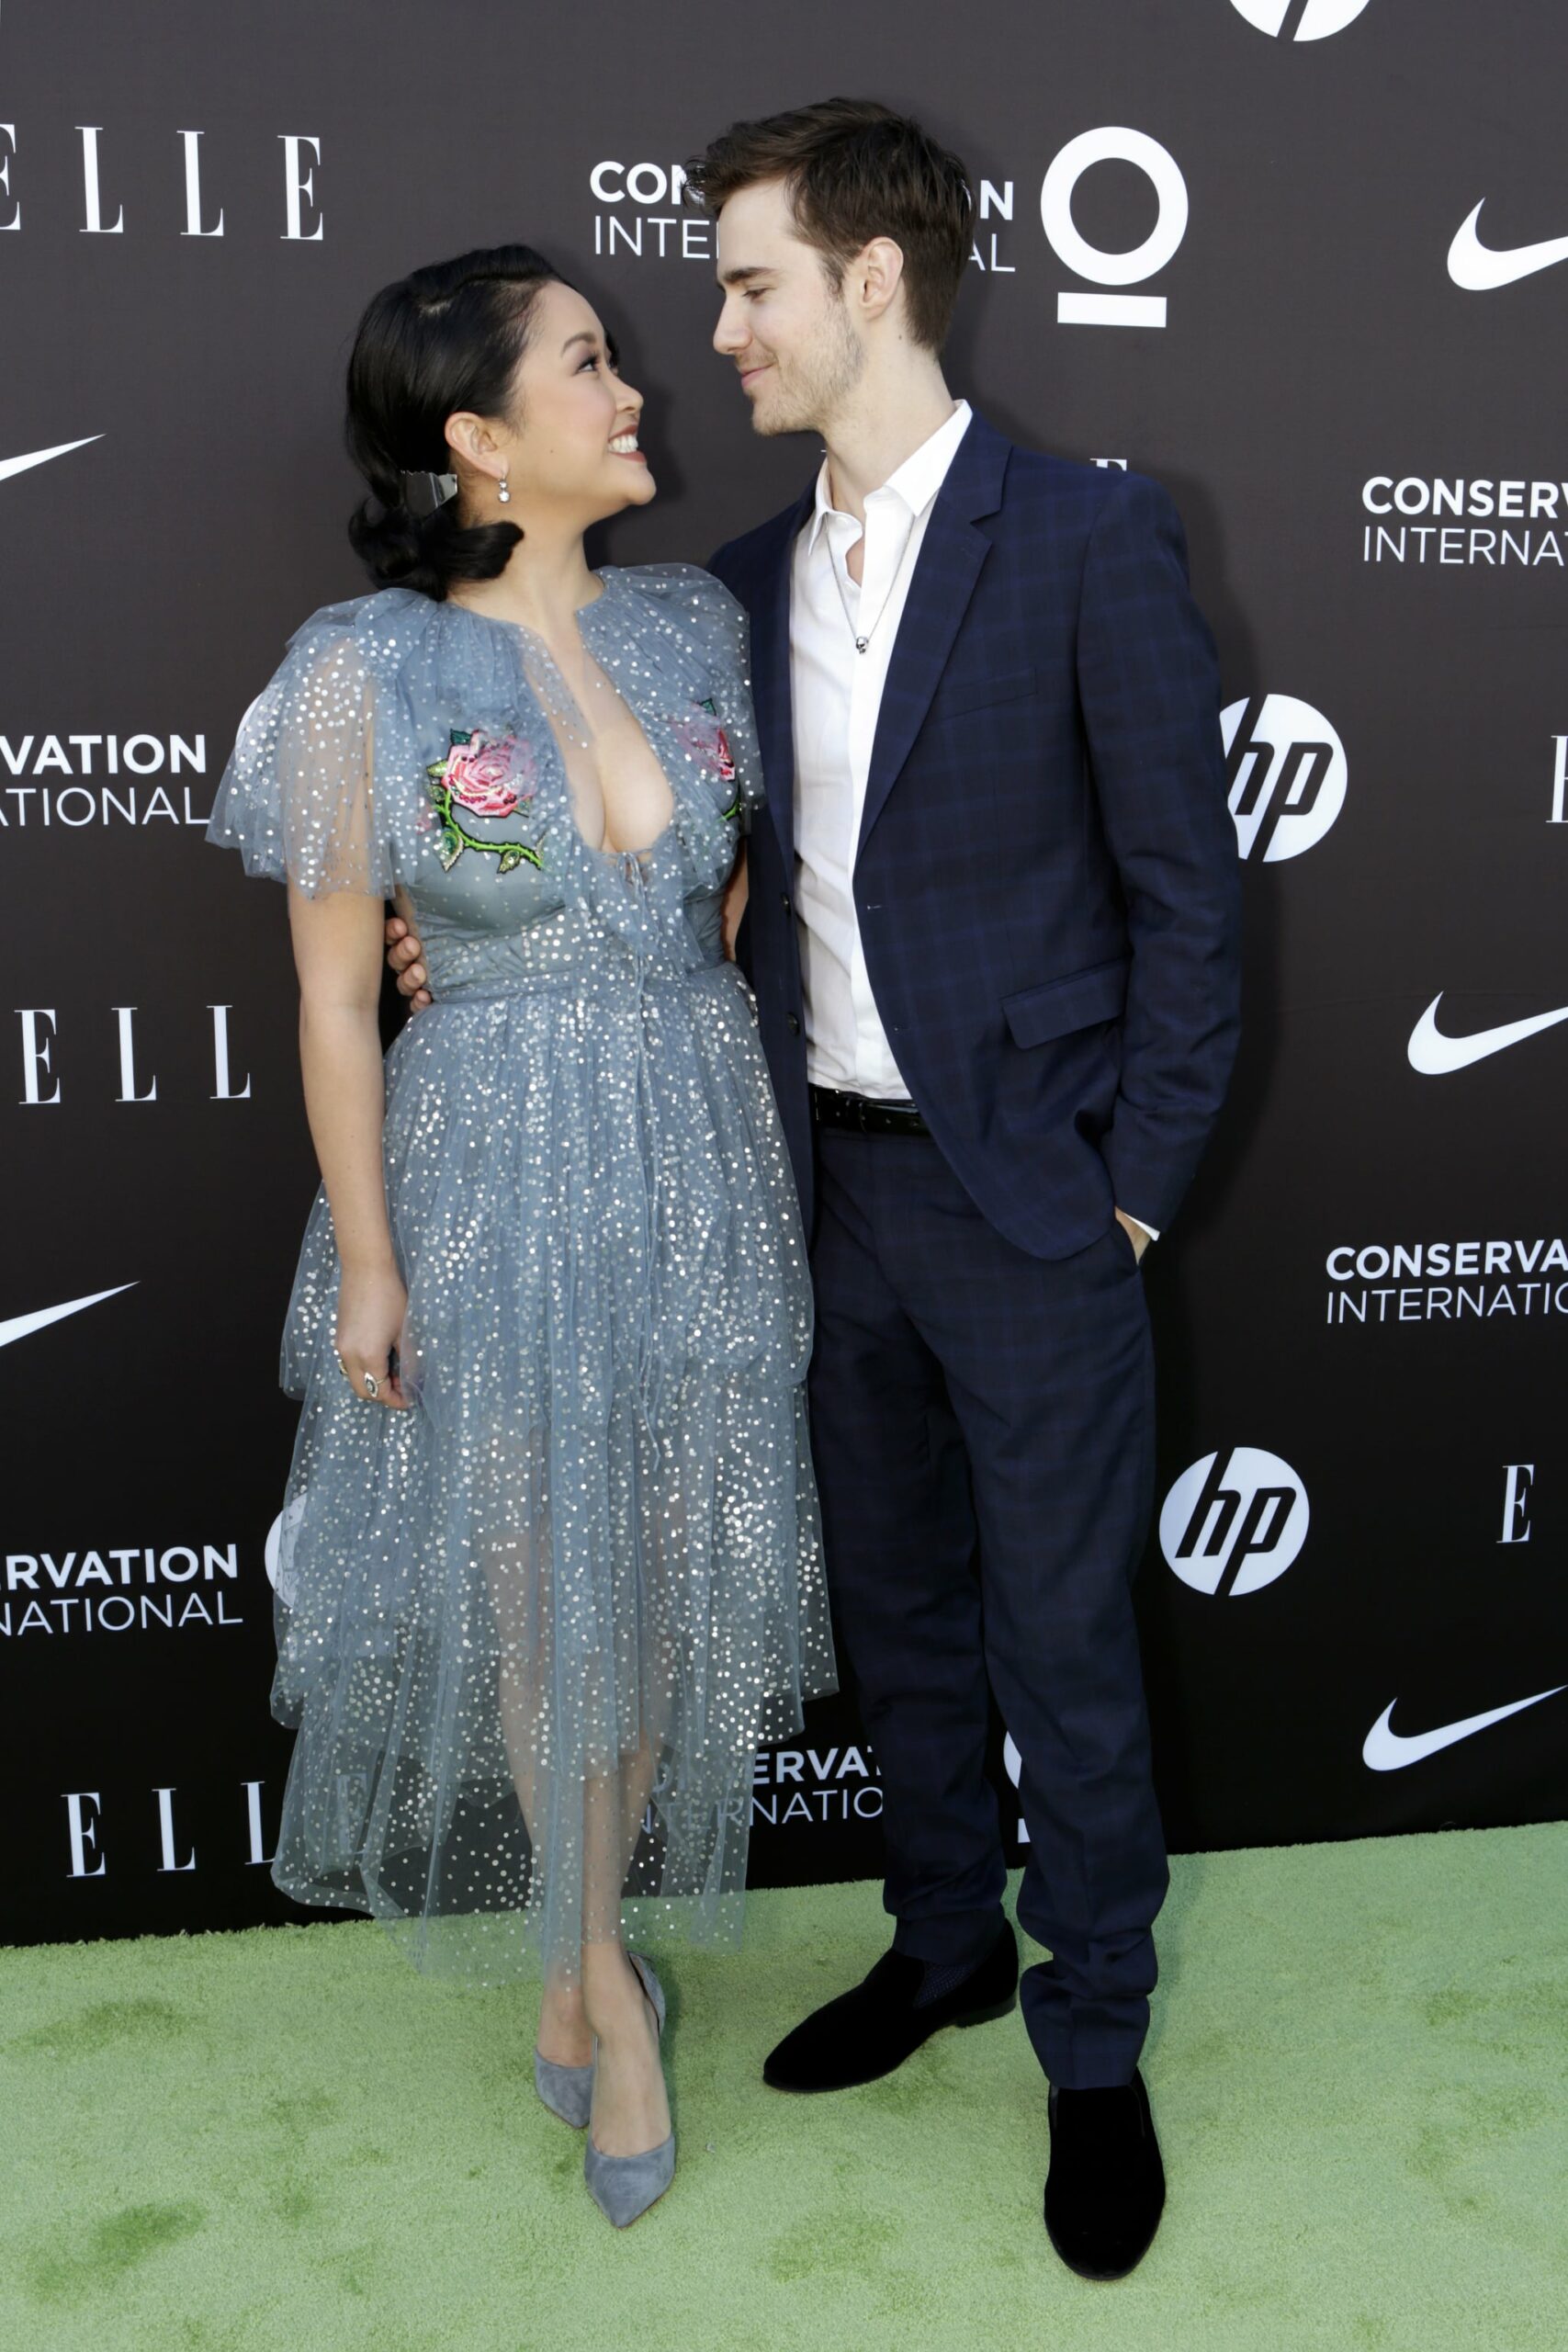 HOLLYWOOD, CALIFORNIA - JUNE 08: (L-R) Lana Condor and Anthony De La Torre attend the Conservation International + ELLE Los Angeles Gala at Milk Studios on June 08, 2019 in Hollywood, California. (Photo by David Poller Photography/Getty Images for Conservation International)